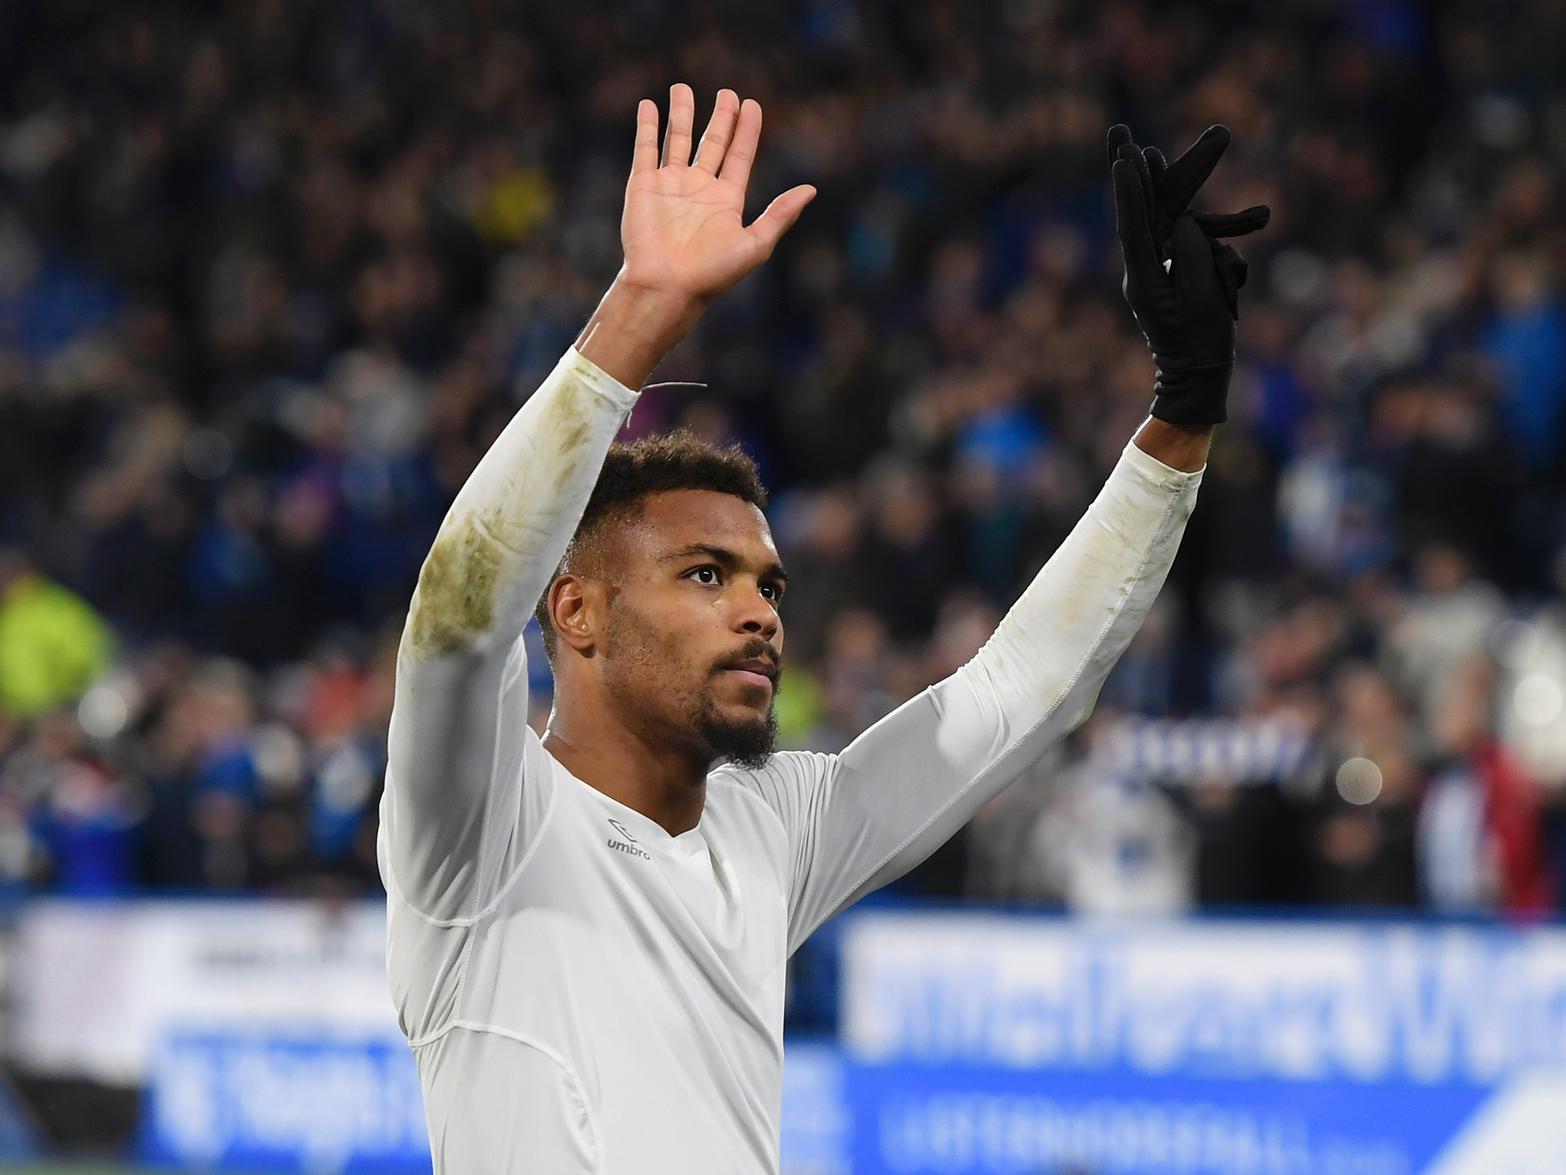 Ligue 1 struggles Nimes could look to pursue a deal for Huddersfield Town striker Steve Mounie, who could well be allowed to leave the Terriers in January to generate some transfer funds. (Sport Witness)